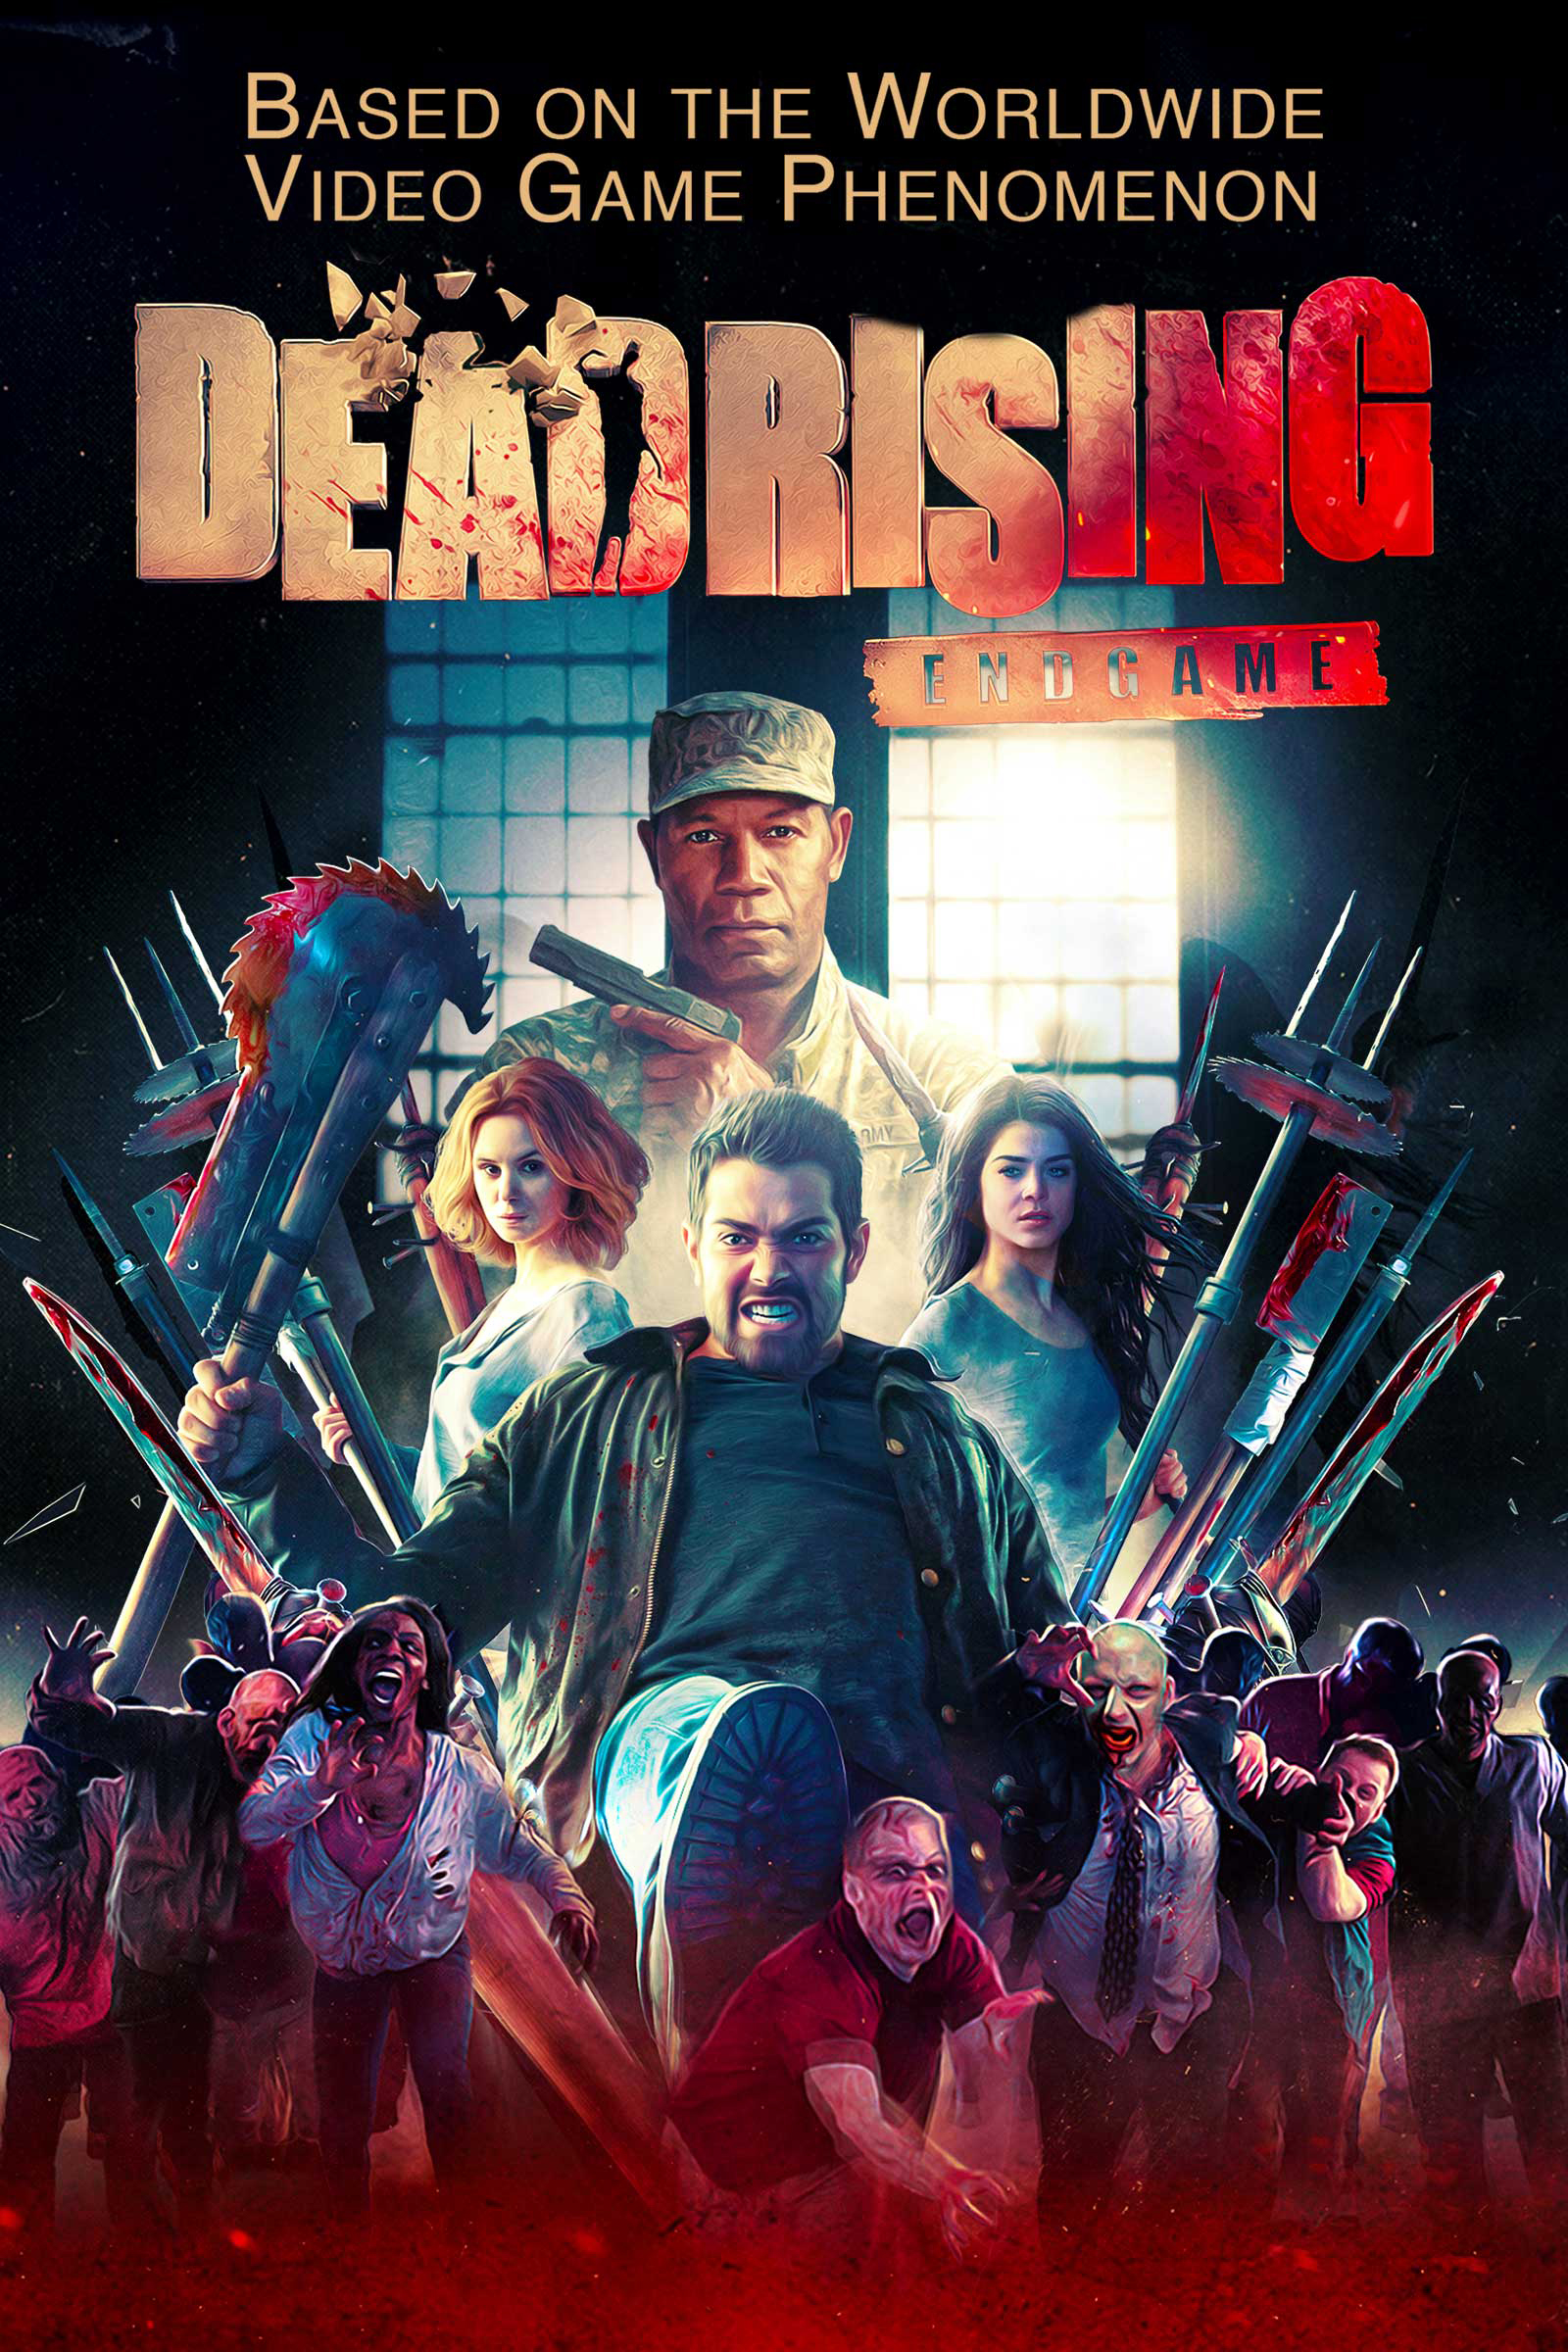 Dead Rising: Endgame - Where to Watch and Stream - TV Guide